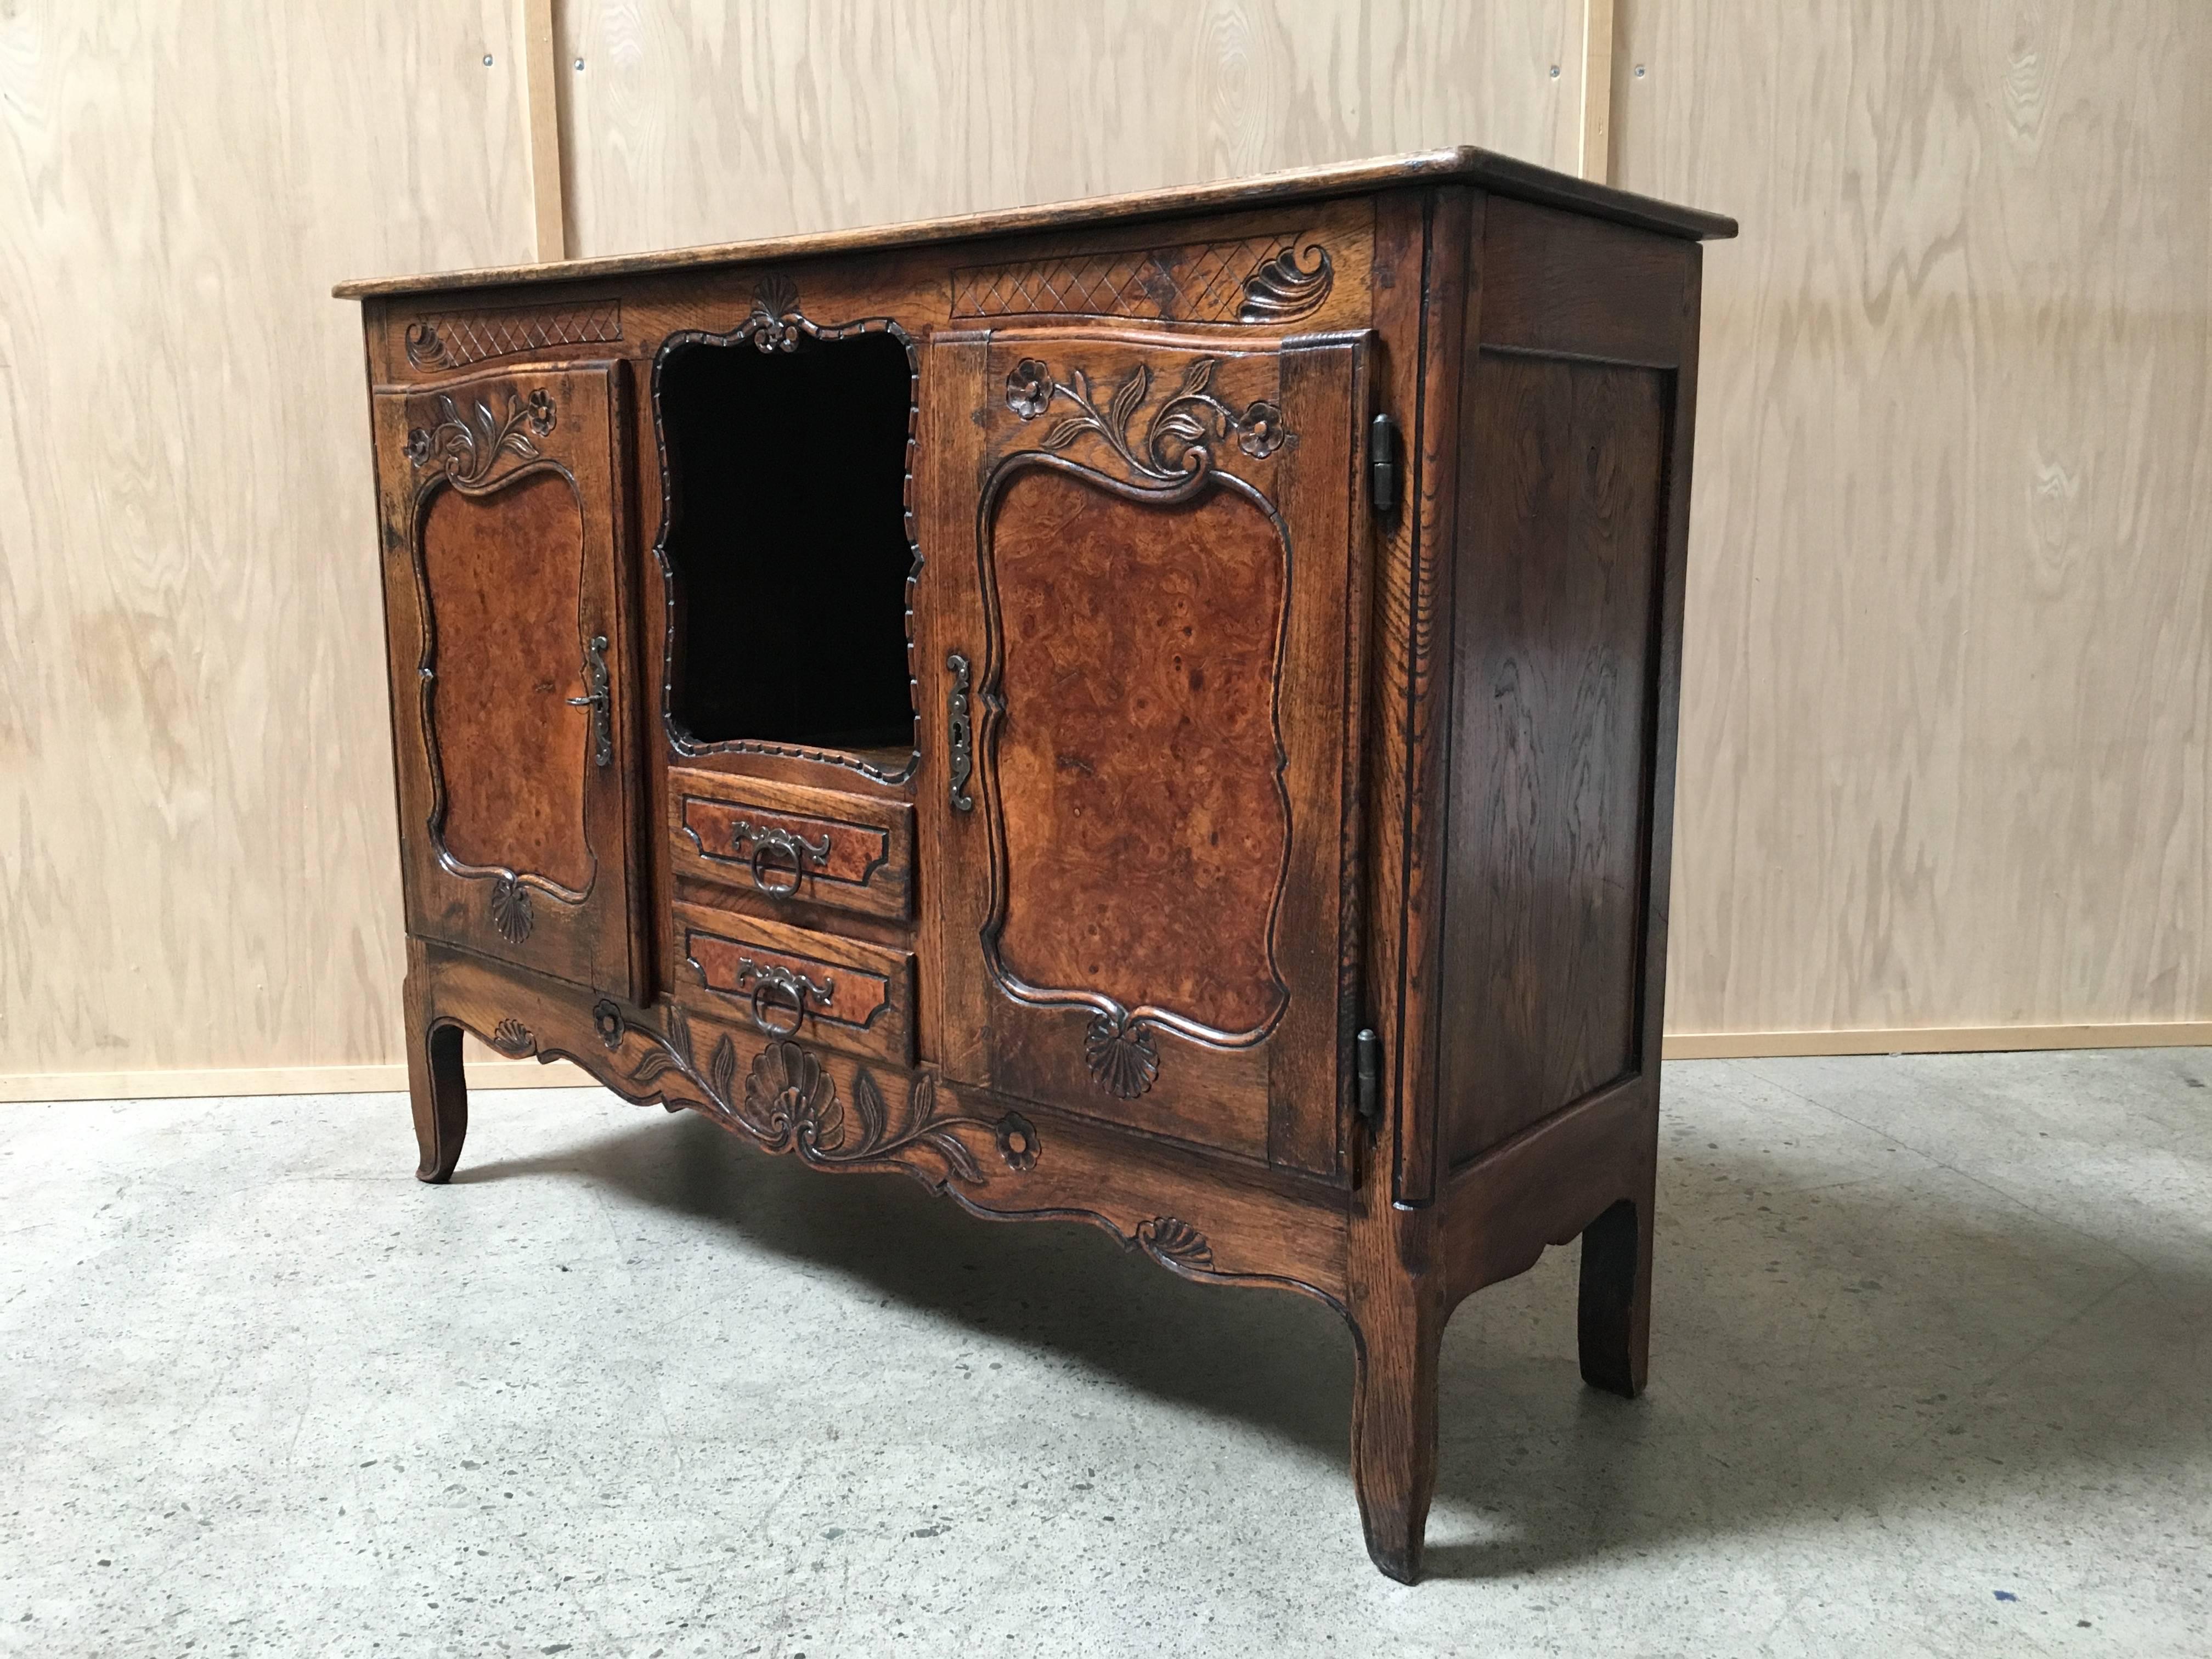 19th century antique rustic buffet with burl wood panels and forged iron hardware.